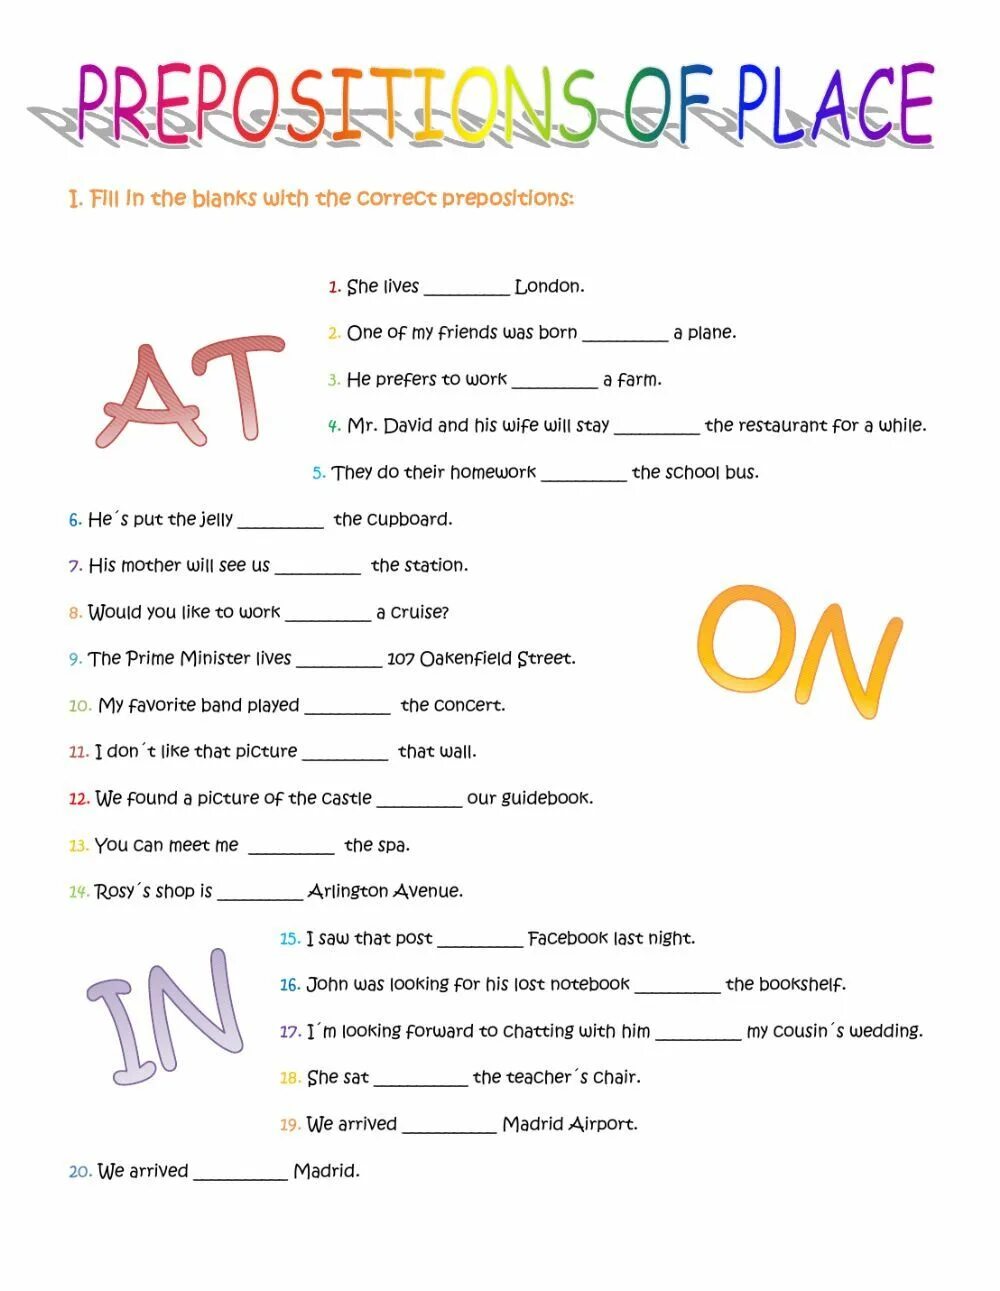 Предлоги at in on Worksheets. In at on место Worksheets. In on at exercises. Prepositions of place in on at. In on at worksheets